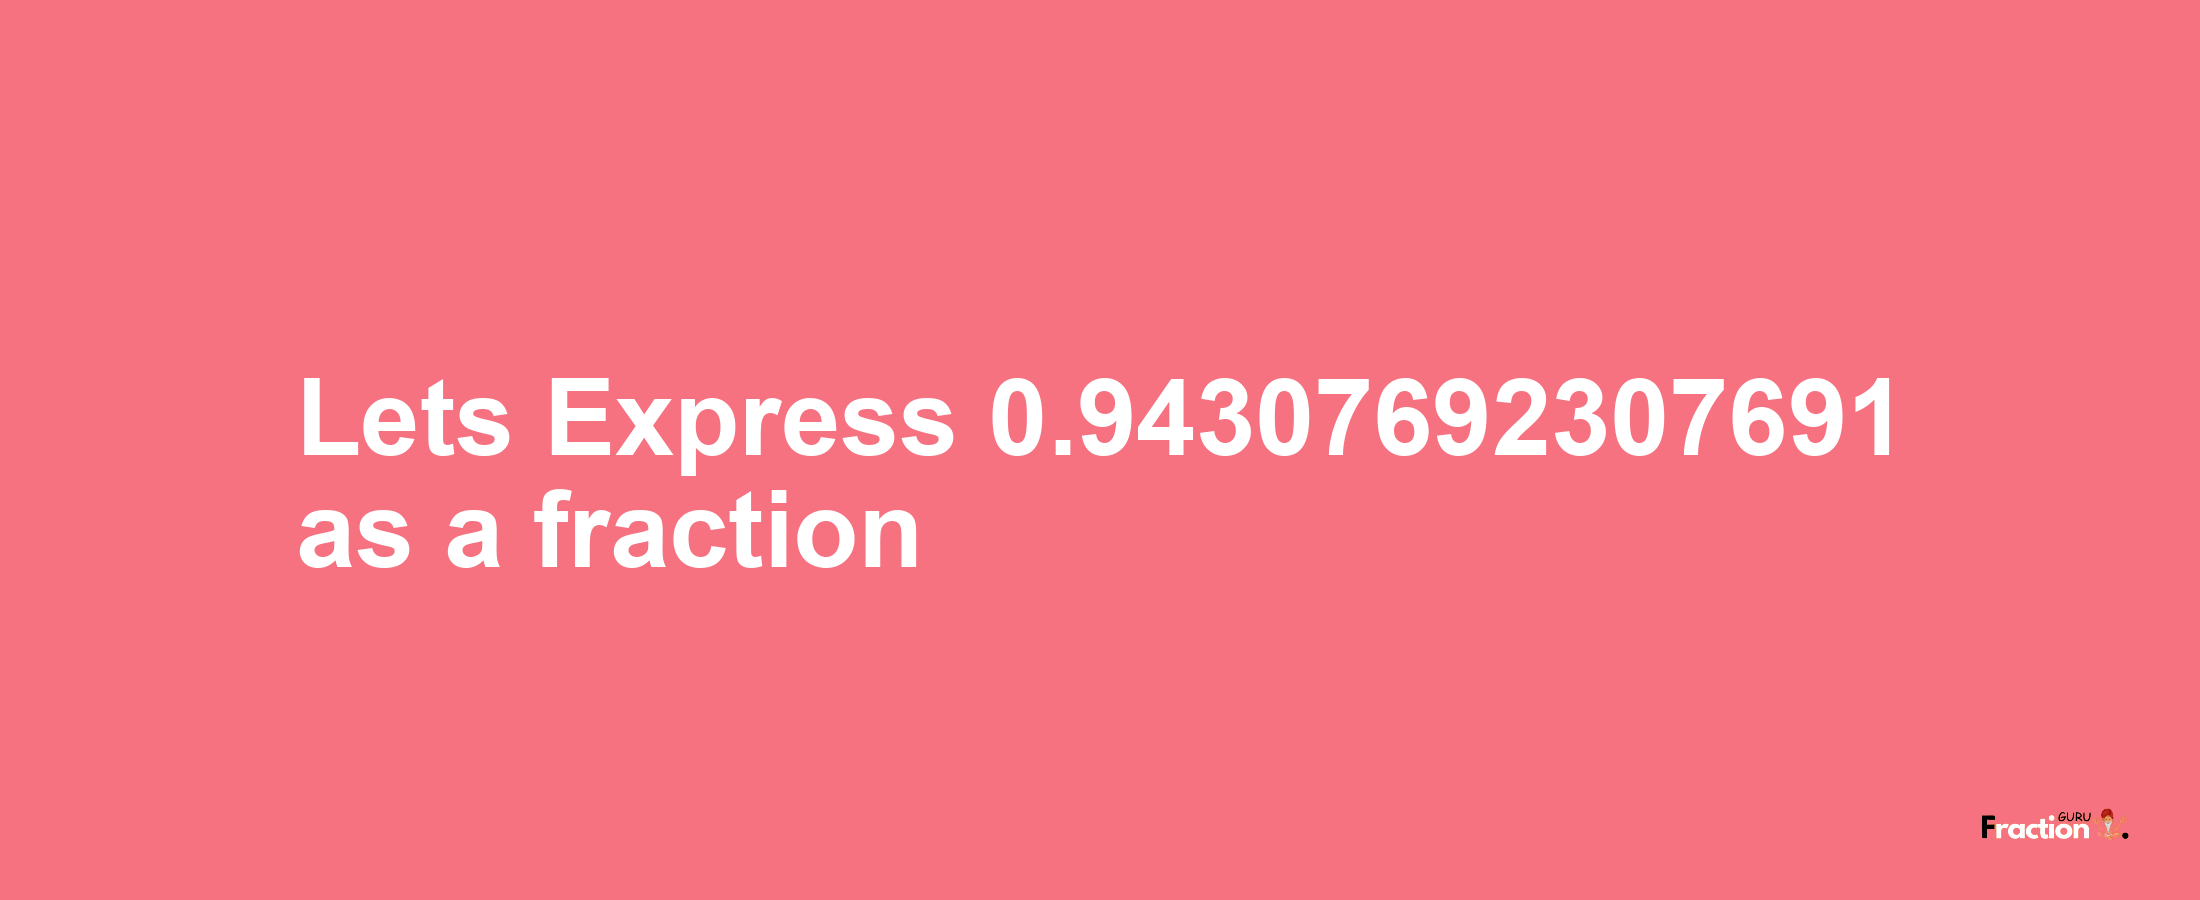 Lets Express 0.94307692307691 as afraction